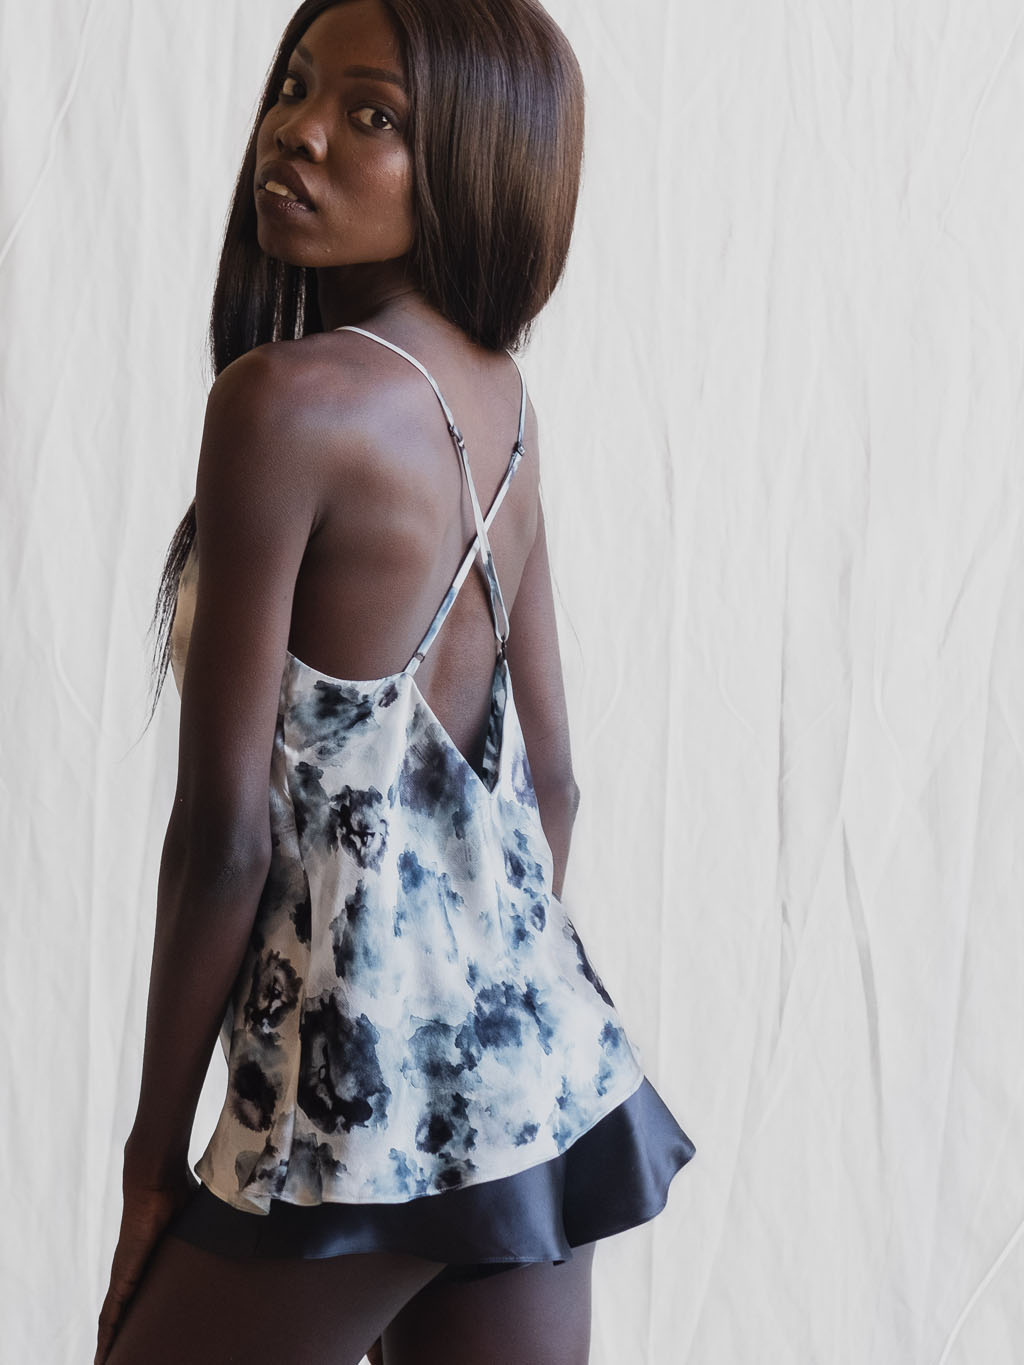 How to Style the Silk Cami